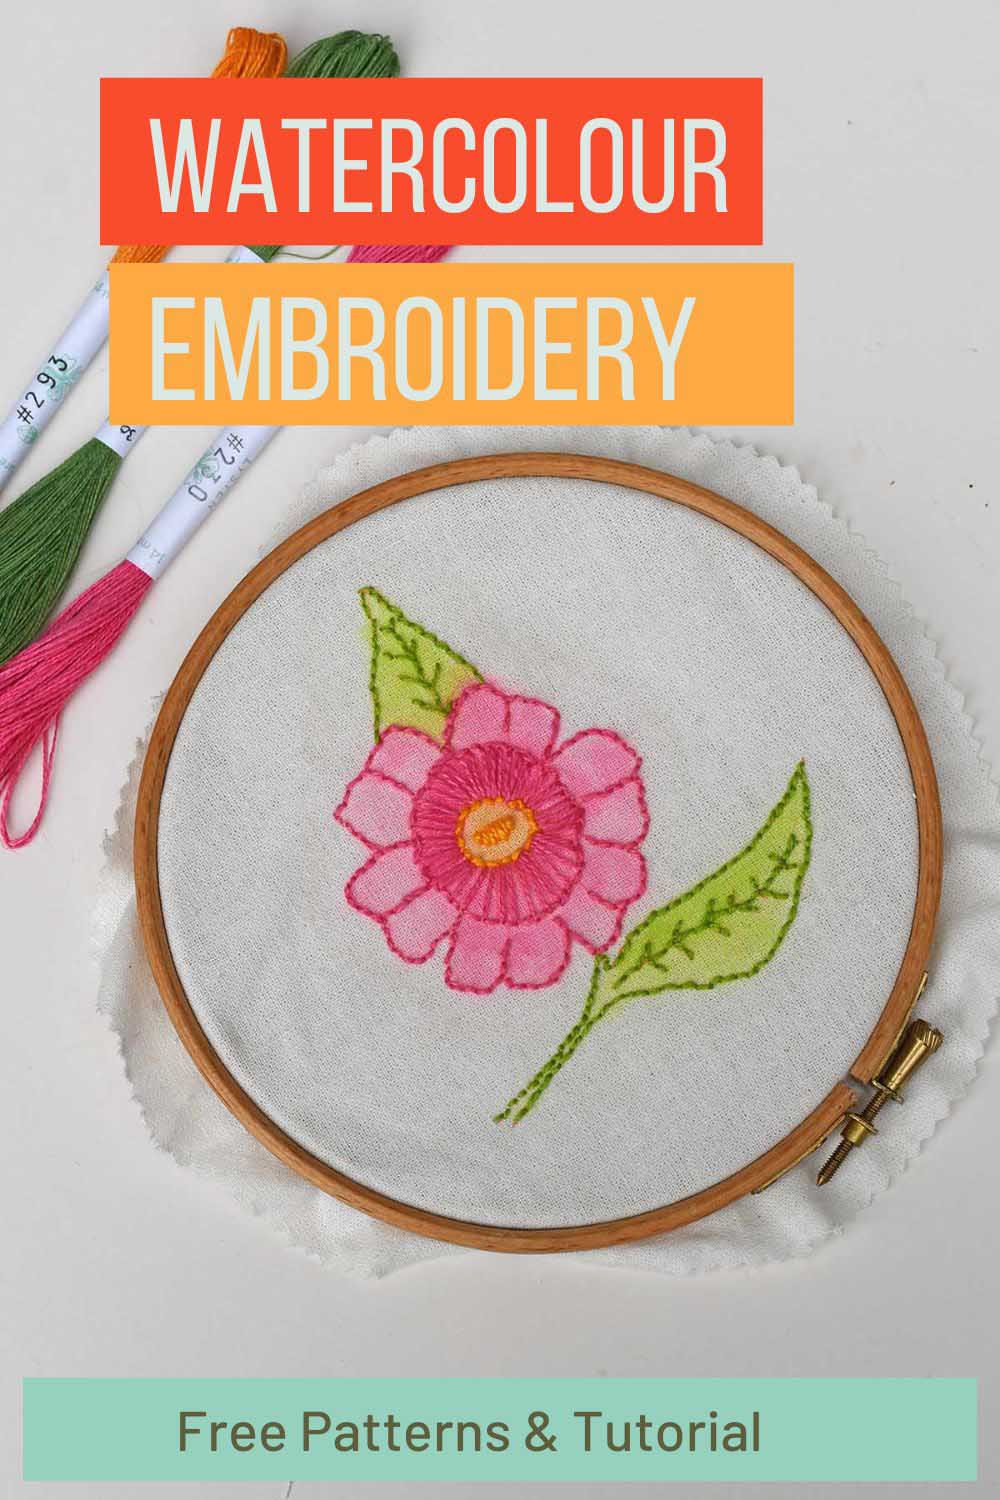 Flower pattern watercolour embroidery